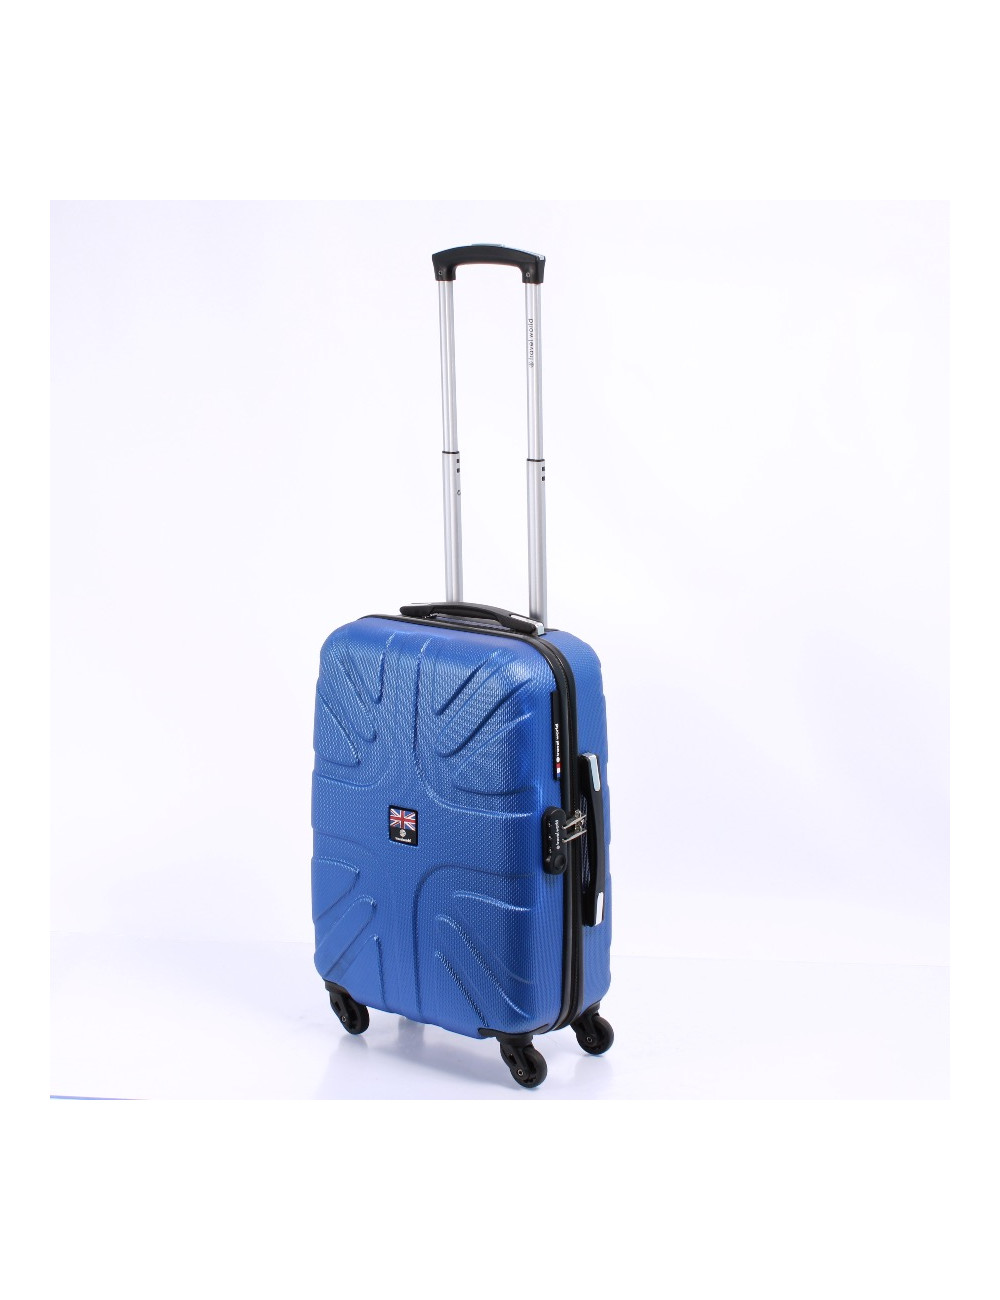 Le Bagage - Valise Cabine -...